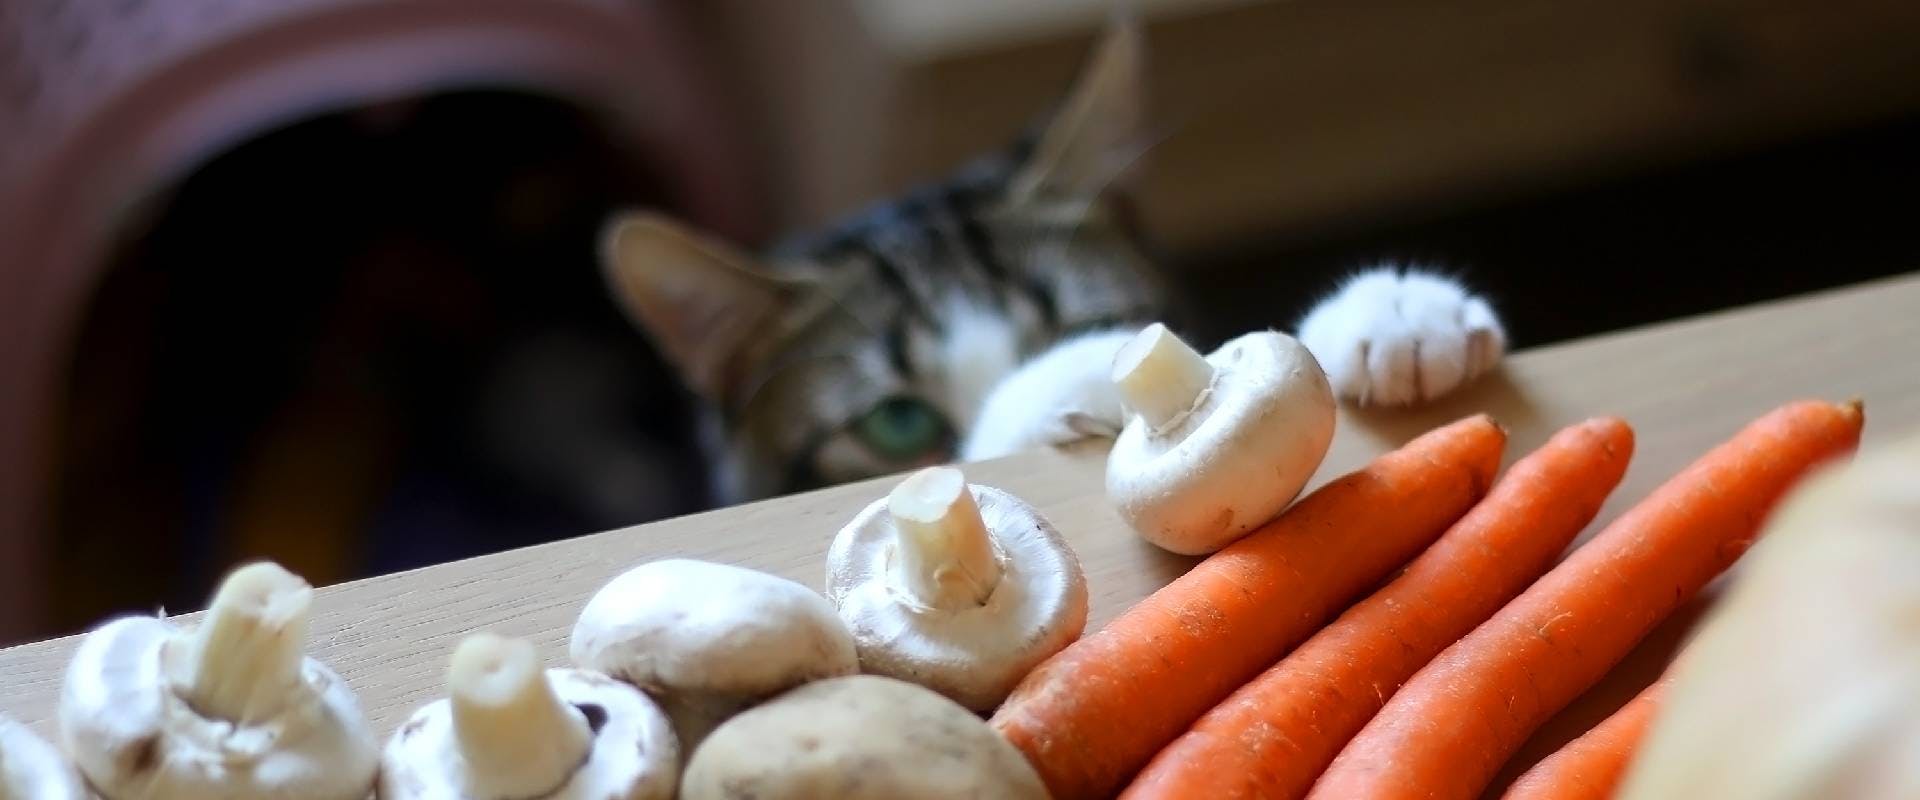 Cat hiding and stealing vegetables and mushrooms from the table